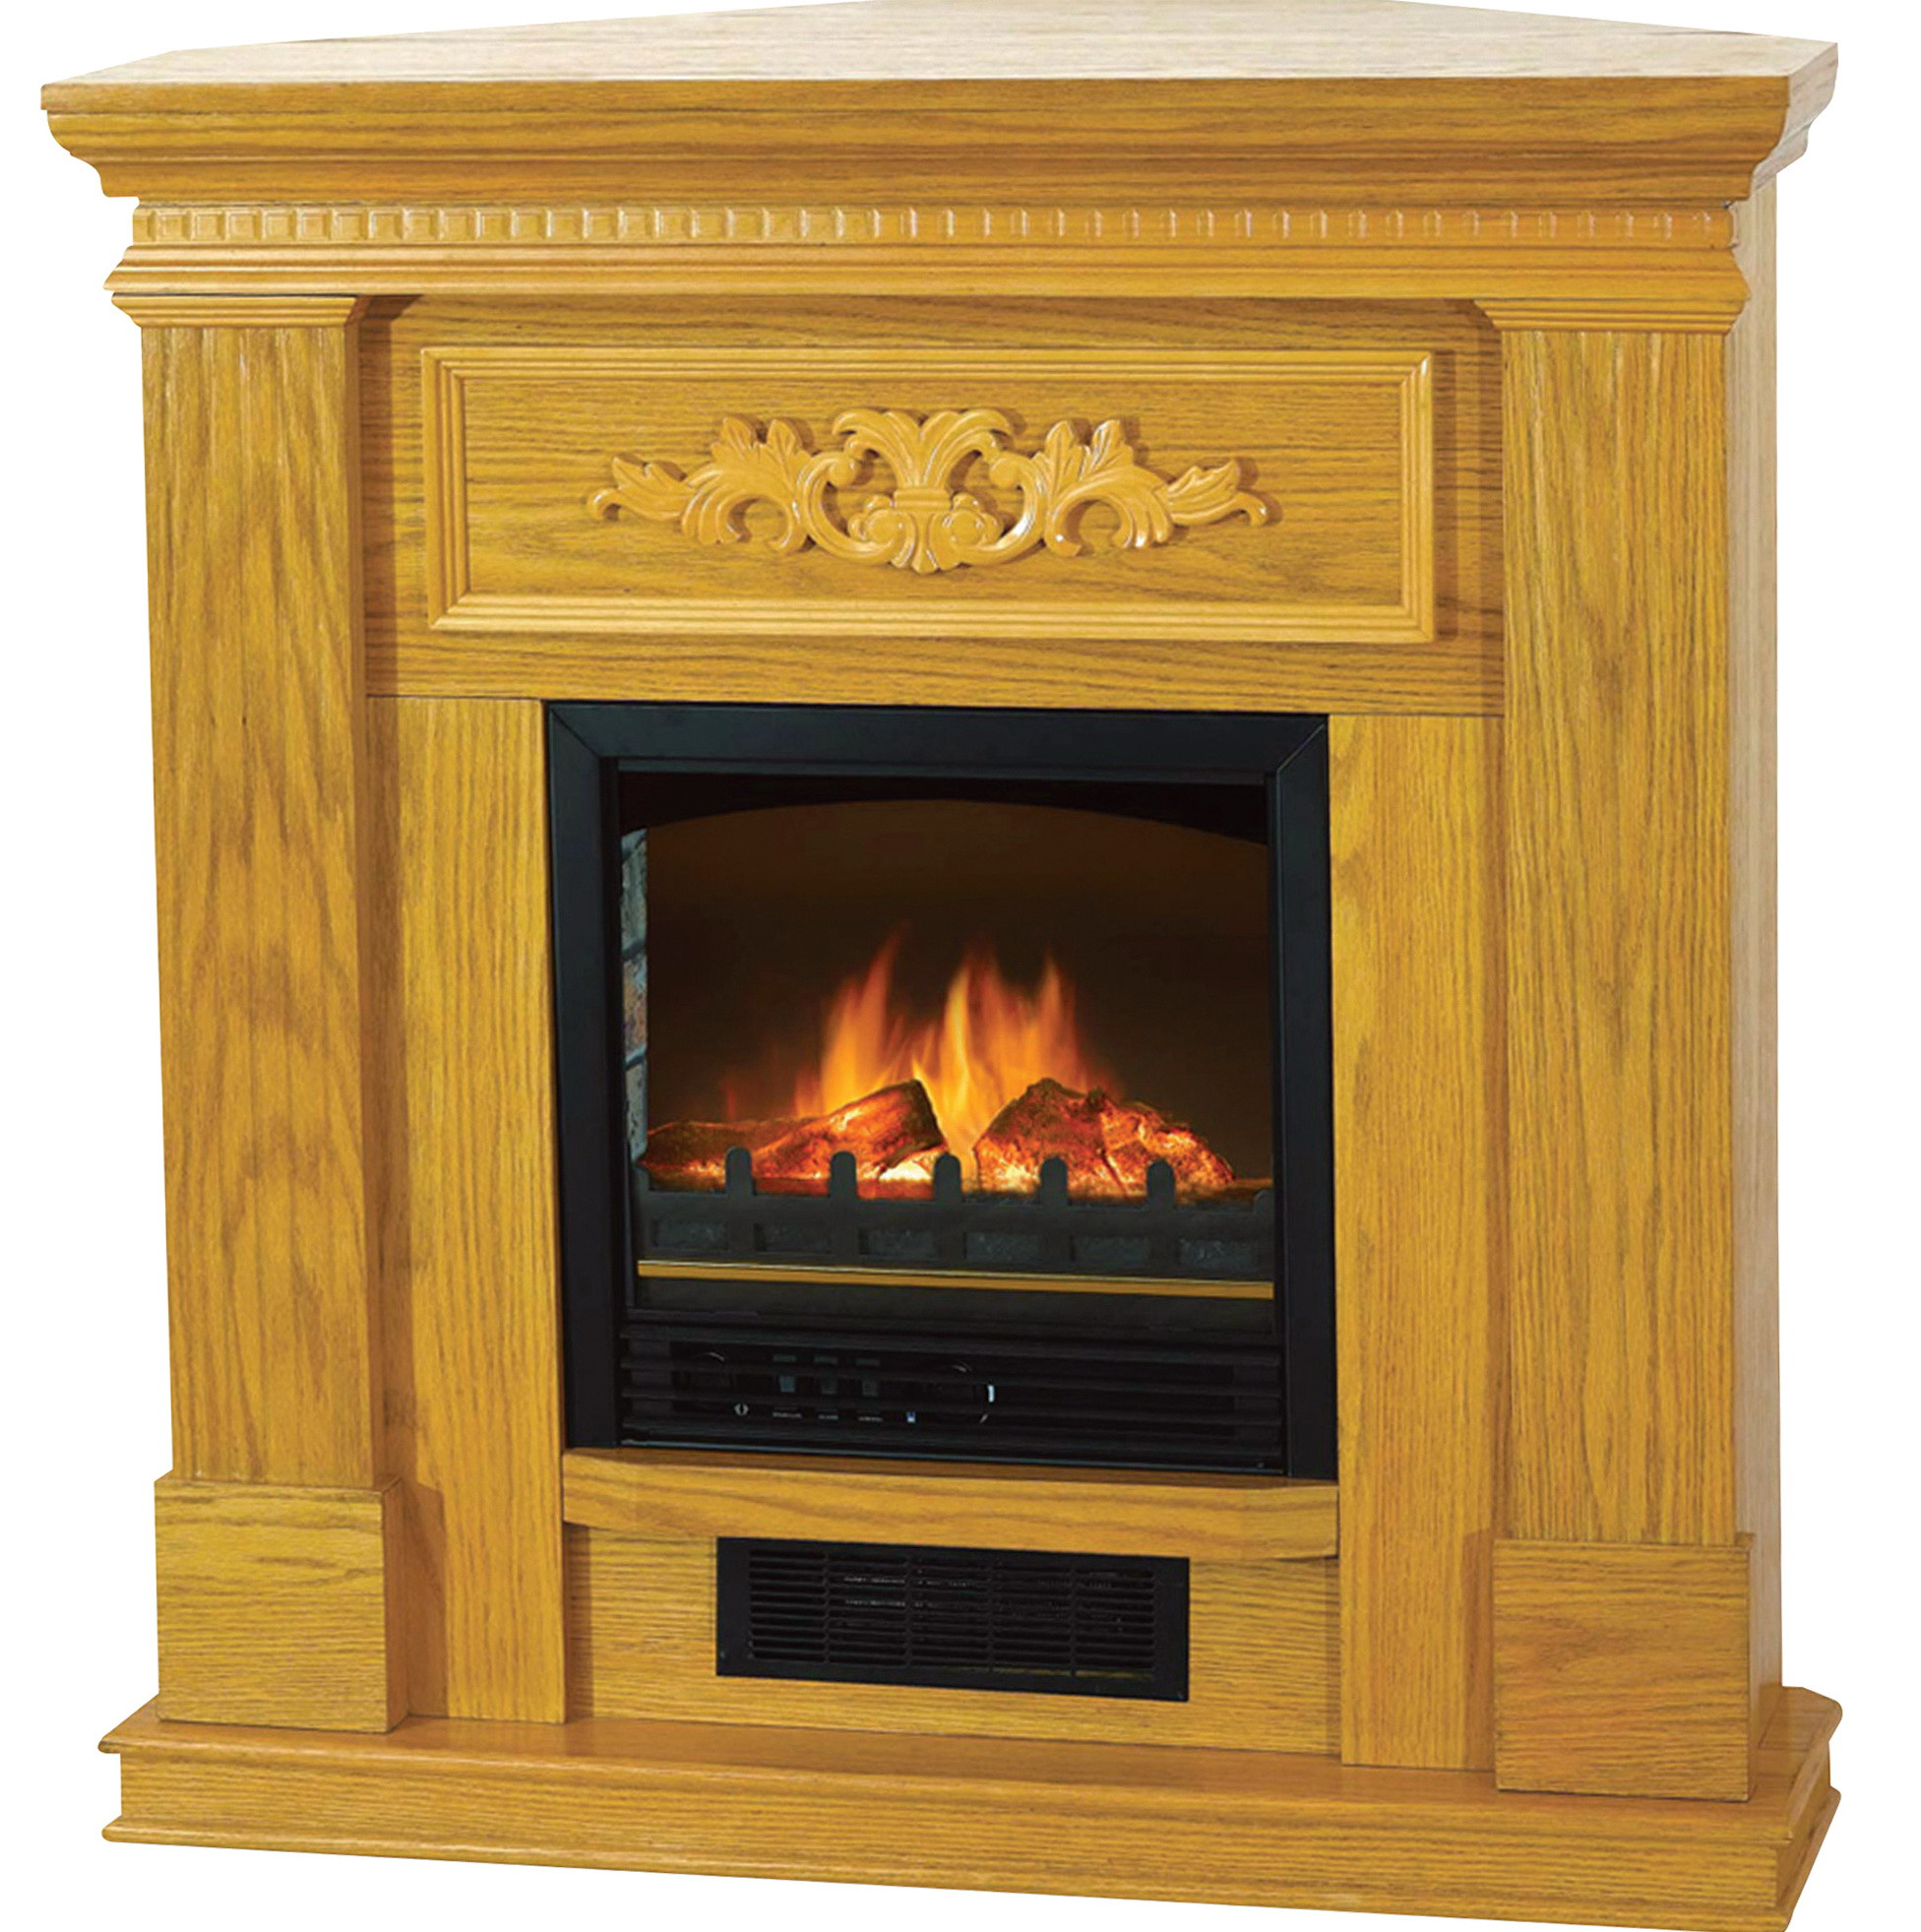 Menards Electric Fireplace Sale
 Electric Fireplaces Clearance At Menards